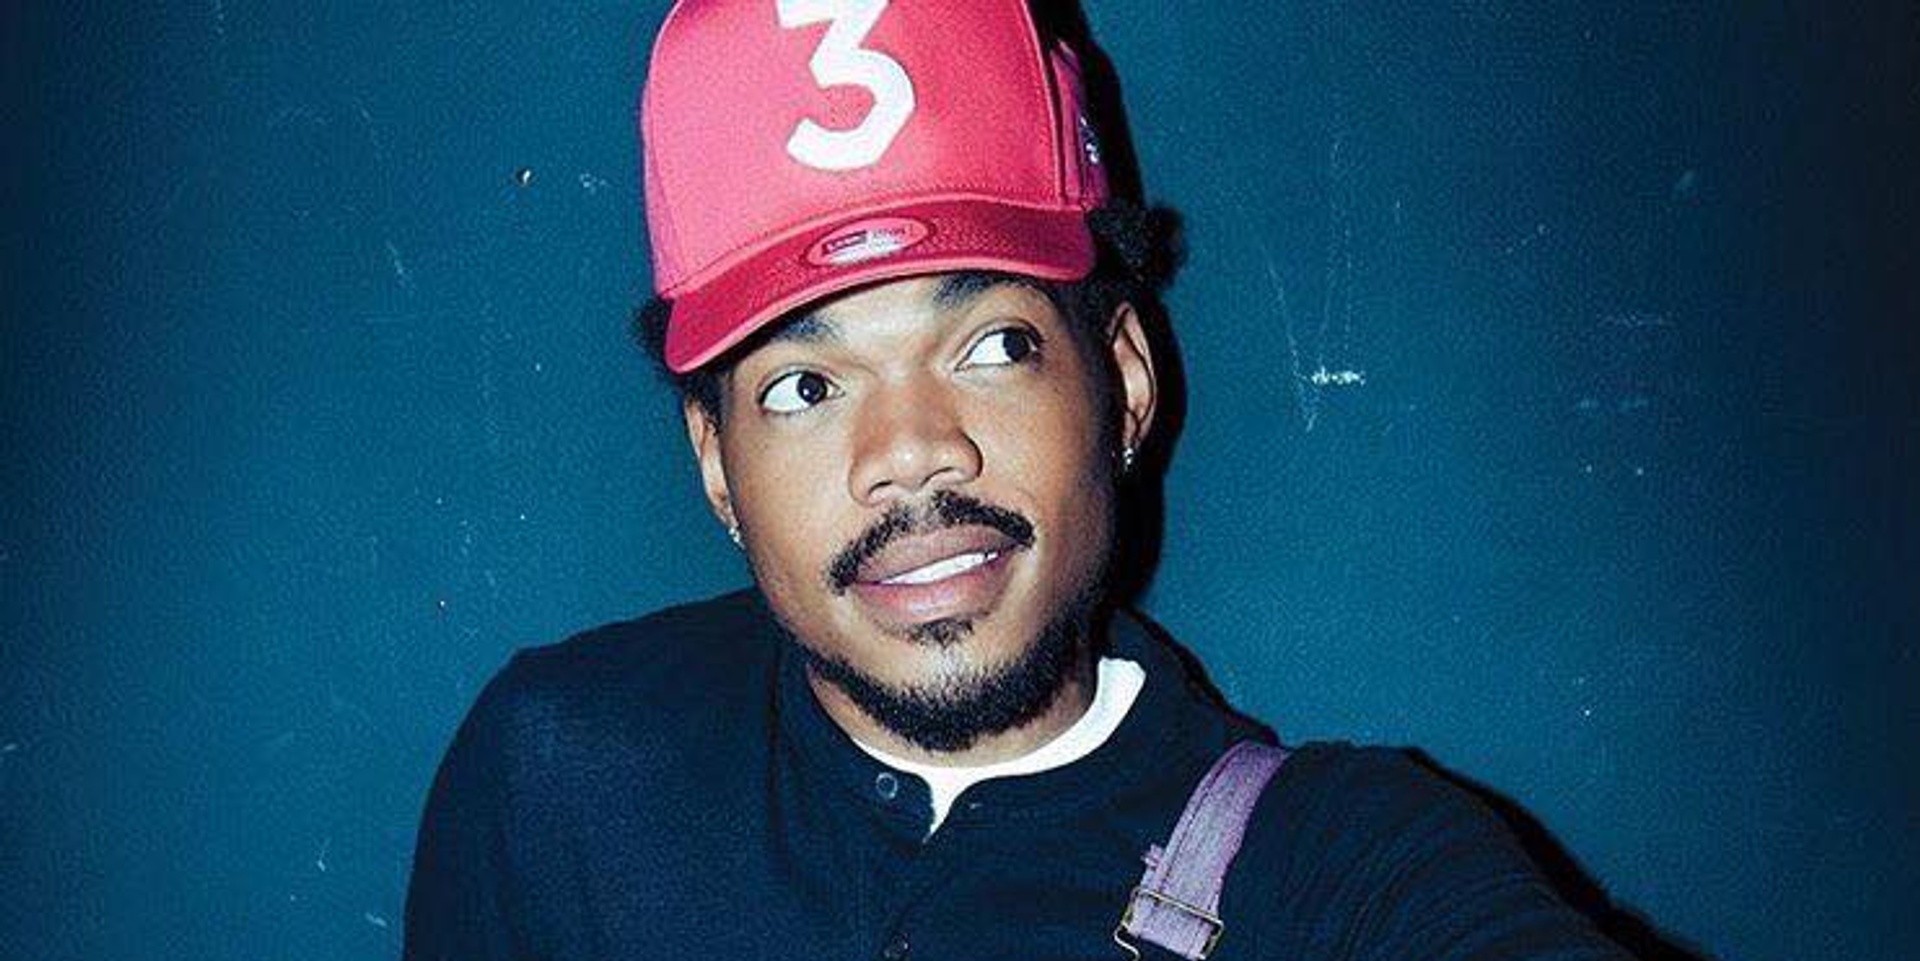 Chance The Rapper is coming to Singapore